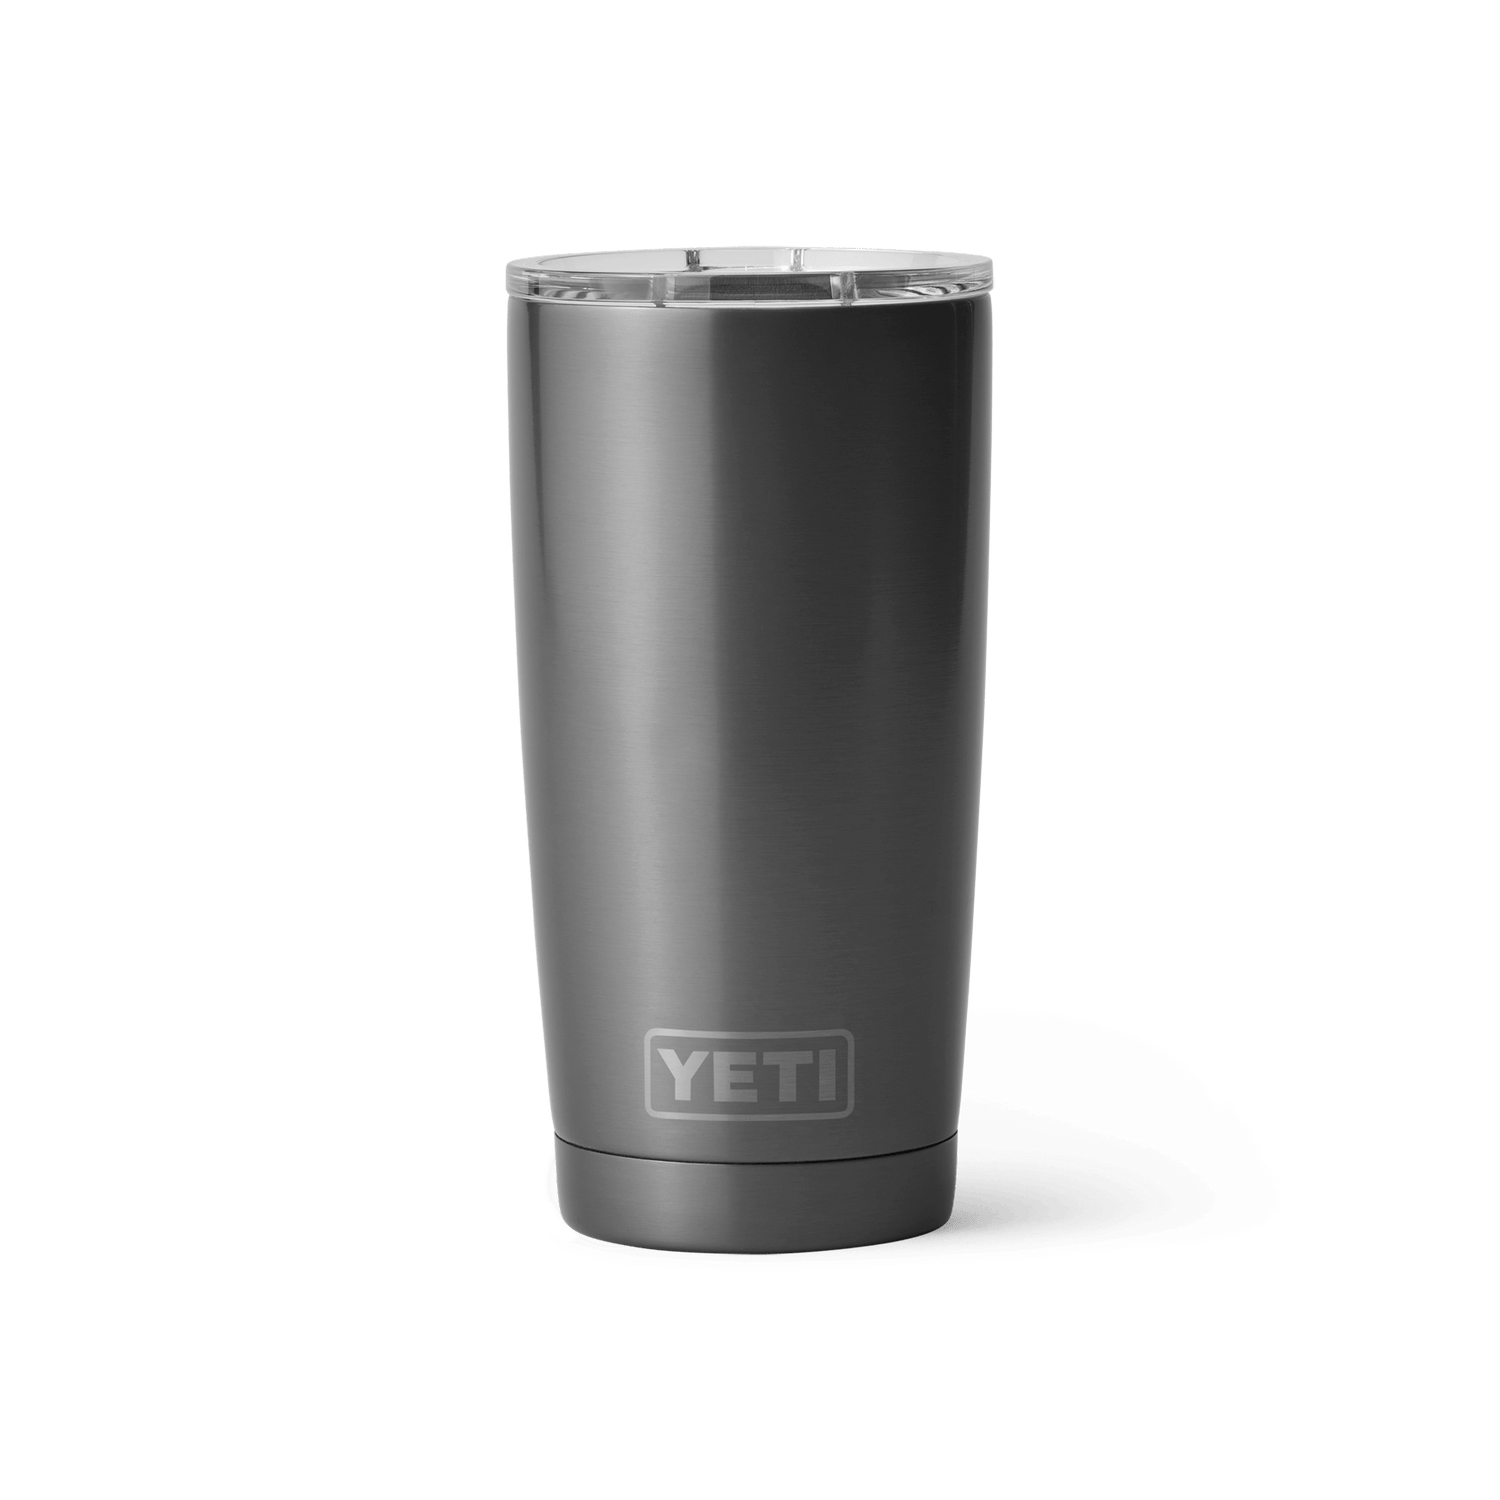  YETI Stainless Steel Rambler Travel Drinking_Cup, Vacuum  Insulated with Stronghold Lid, 30 Ounces, Alpine Yellow : Home & Kitchen